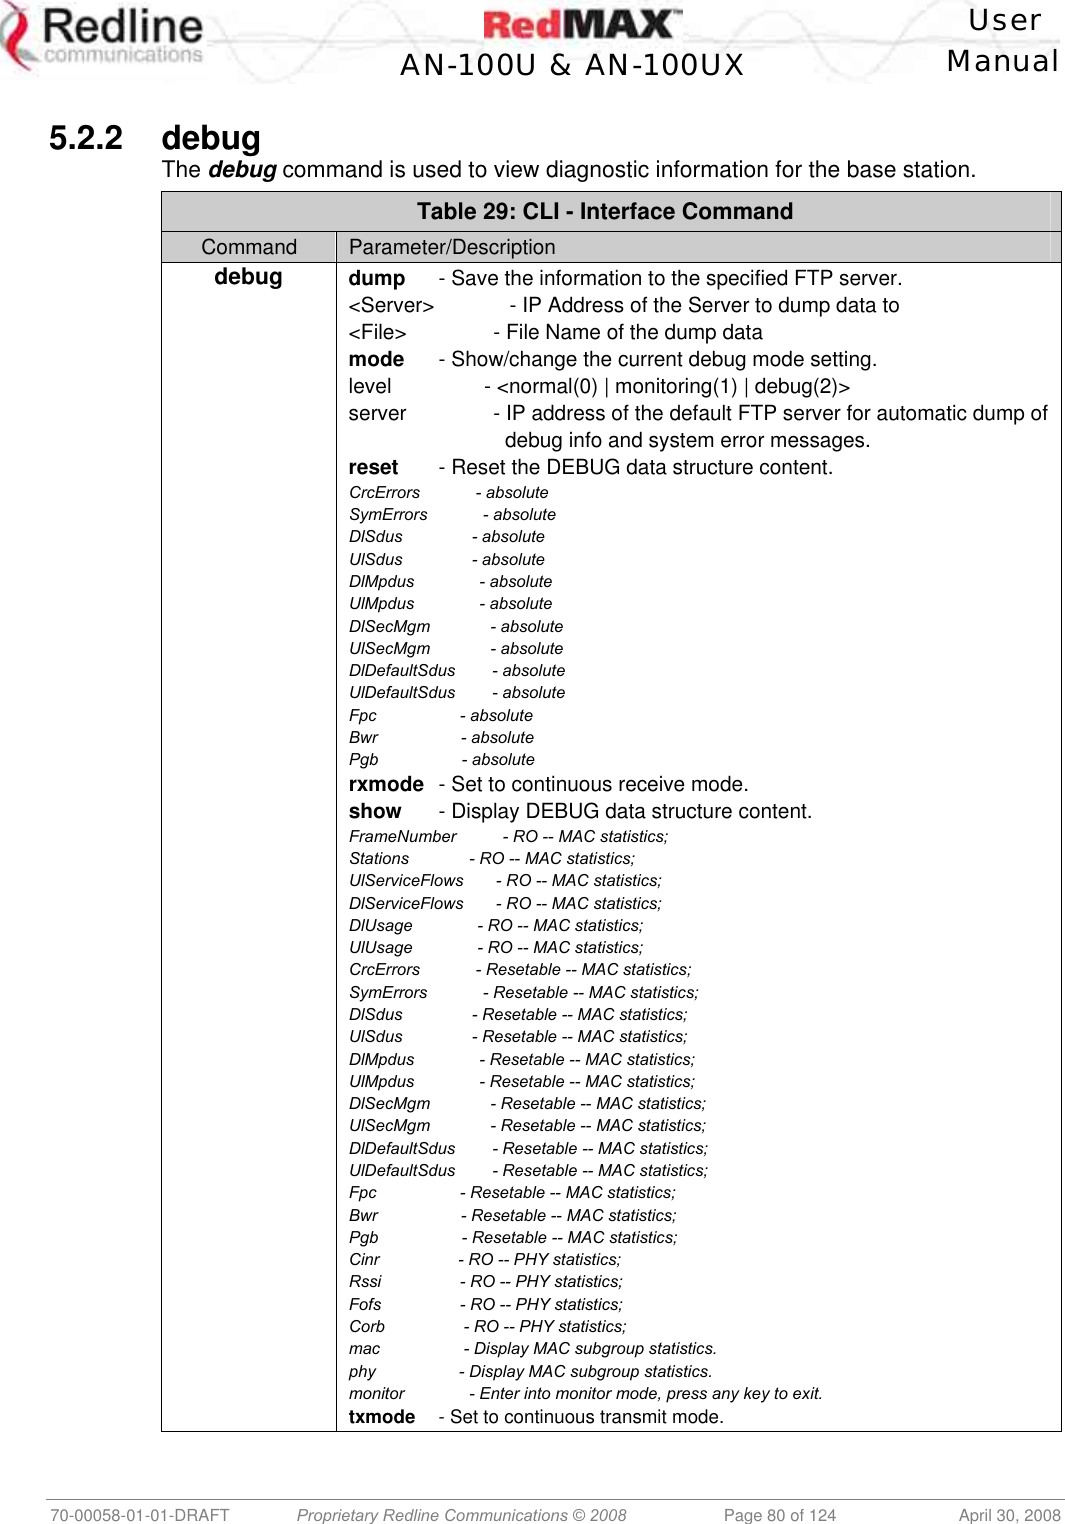    User  AN-100U &amp; AN-100UX Manual   70-00058-01-01-DRAFT  Proprietary Redline Communications © 2008   Page 80 of 124  April 30, 2008  5.2.2 debug The debug command is used to view diagnostic information for the base station. Table 29: CLI - Interface Command Command  Parameter/Description debug dump  - Save the information to the specified FTP server. &lt;Server&gt;             - IP Address of the Server to dump data to &lt;File&gt;               - File Name of the dump data mode  - Show/change the current debug mode setting. level                - &lt;normal(0) | monitoring(1) | debug(2)&gt; server               - IP address of the default FTP server for automatic dump of                            debug info and system error messages. reset  - Reset the DEBUG data structure content. CrcErrors            - absolute SymErrors            - absolute DlSdus               - absolute UlSdus               - absolute DlMpdus              - absolute UlMpdus              - absolute DlSecMgm             - absolute UlSecMgm             - absolute DlDefaultSdus        - absolute UlDefaultSdus        - absolute Fpc                  - absolute Bwr                  - absolute Pgb                  - absolute rxmode  - Set to continuous receive mode. show  - Display DEBUG data structure content. FrameNumber          - RO -- MAC statistics; Stations             - RO -- MAC statistics; UlServiceFlows       - RO -- MAC statistics; DlServiceFlows       - RO -- MAC statistics; DlUsage              - RO -- MAC statistics; UlUsage              - RO -- MAC statistics; CrcErrors            - Resetable -- MAC statistics; SymErrors            - Resetable -- MAC statistics; DlSdus               - Resetable -- MAC statistics; UlSdus               - Resetable -- MAC statistics; DlMpdus              - Resetable -- MAC statistics; UlMpdus              - Resetable -- MAC statistics; DlSecMgm             - Resetable -- MAC statistics; UlSecMgm             - Resetable -- MAC statistics; DlDefaultSdus        - Resetable -- MAC statistics; UlDefaultSdus        - Resetable -- MAC statistics; Fpc                  - Resetable -- MAC statistics; Bwr                  - Resetable -- MAC statistics; Pgb                  - Resetable -- MAC statistics; Cinr                 - RO -- PHY statistics; Rssi                 - RO -- PHY statistics; Fofs                 - RO -- PHY statistics; Corb                 - RO -- PHY statistics; mac                  - Display MAC subgroup statistics. phy                  - Display MAC subgroup statistics. monitor              - Enter into monitor mode, press any key to exit. txmode  - Set to continuous transmit mode.  